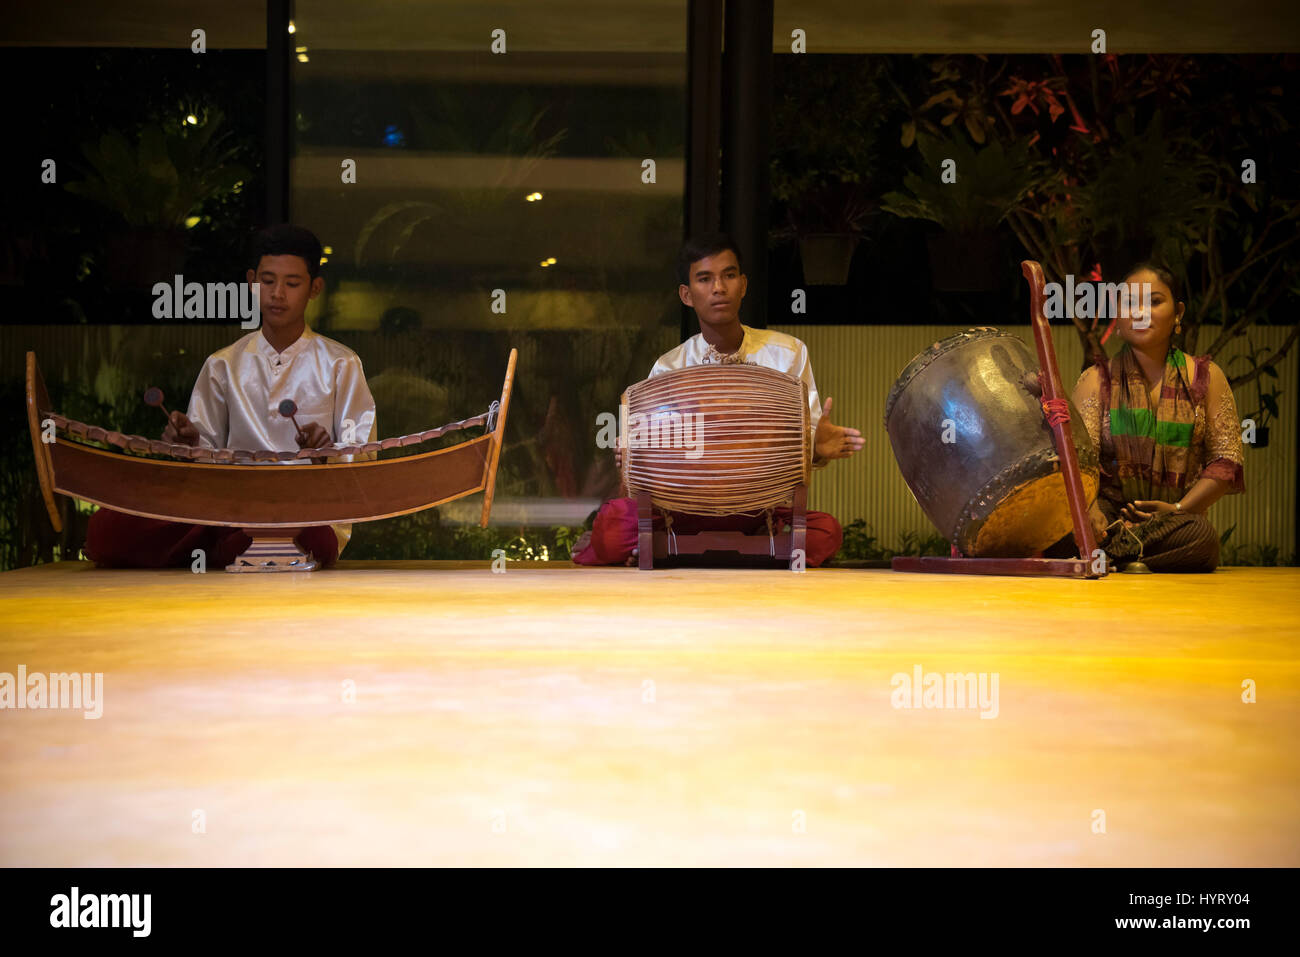 Horizontal portrait of traditional musical instruments being played at an Apsara Stock Photo